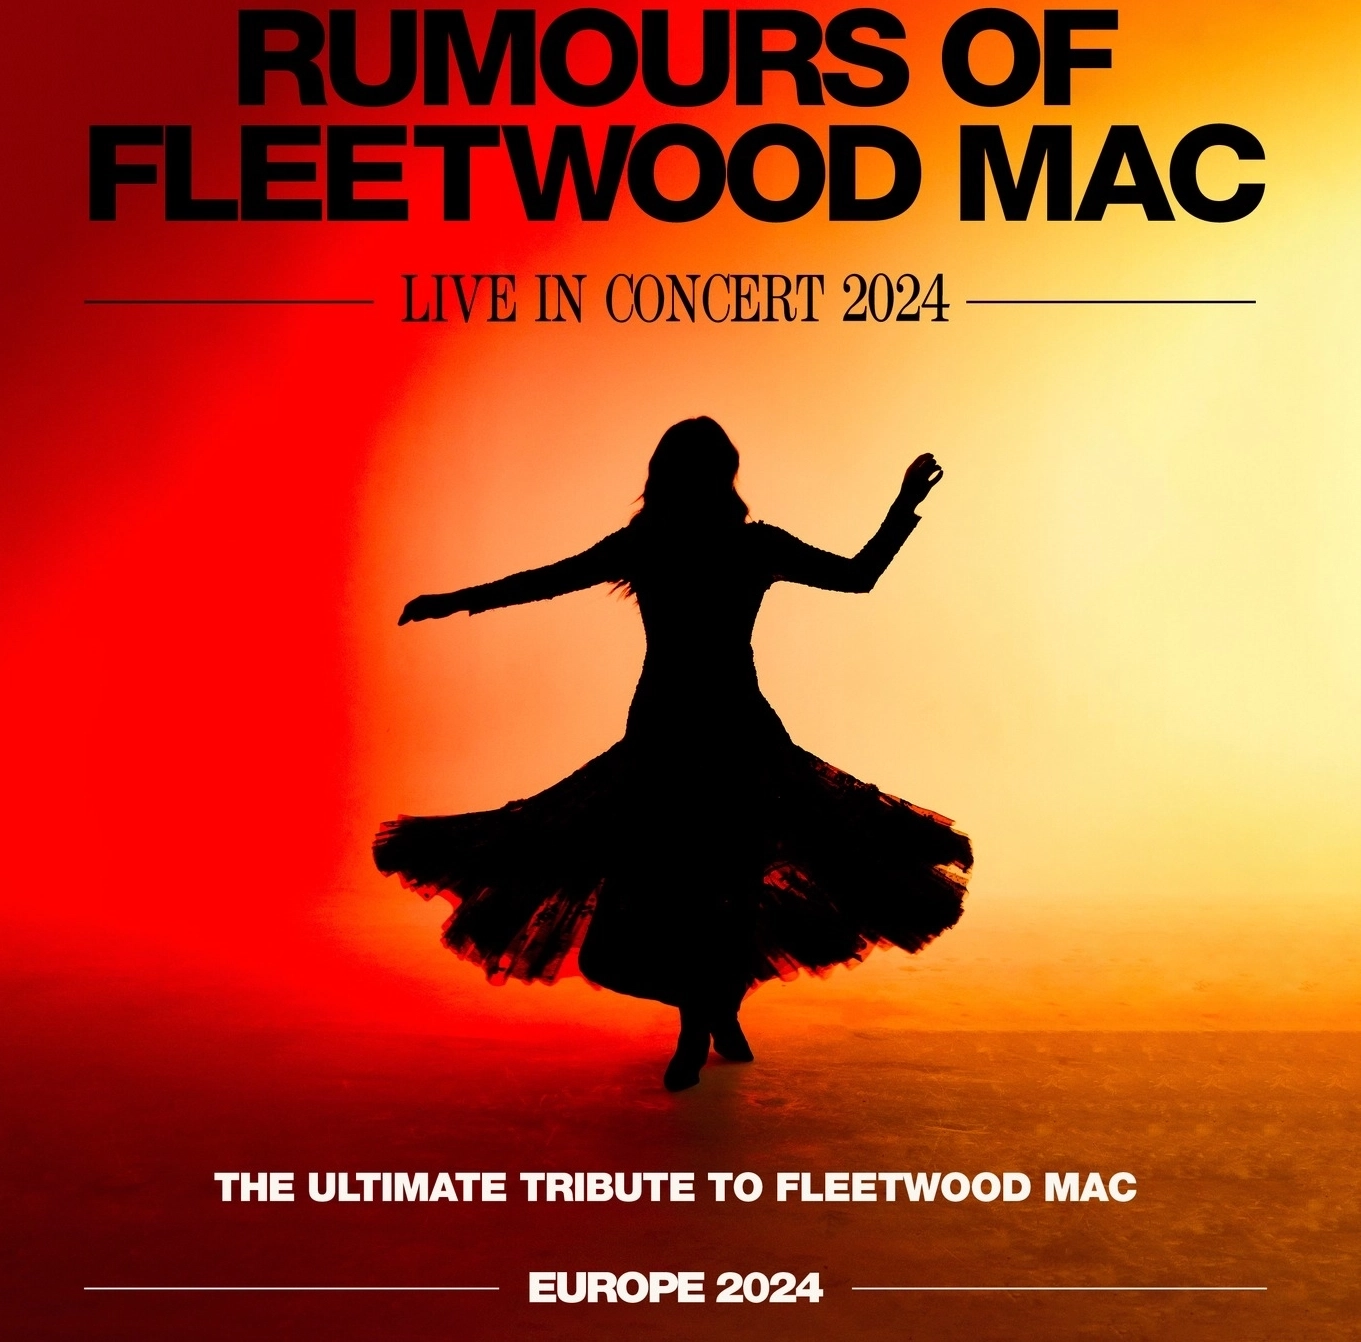 Rumours Of Fleetwood Mac at Le Forum Liege Tickets